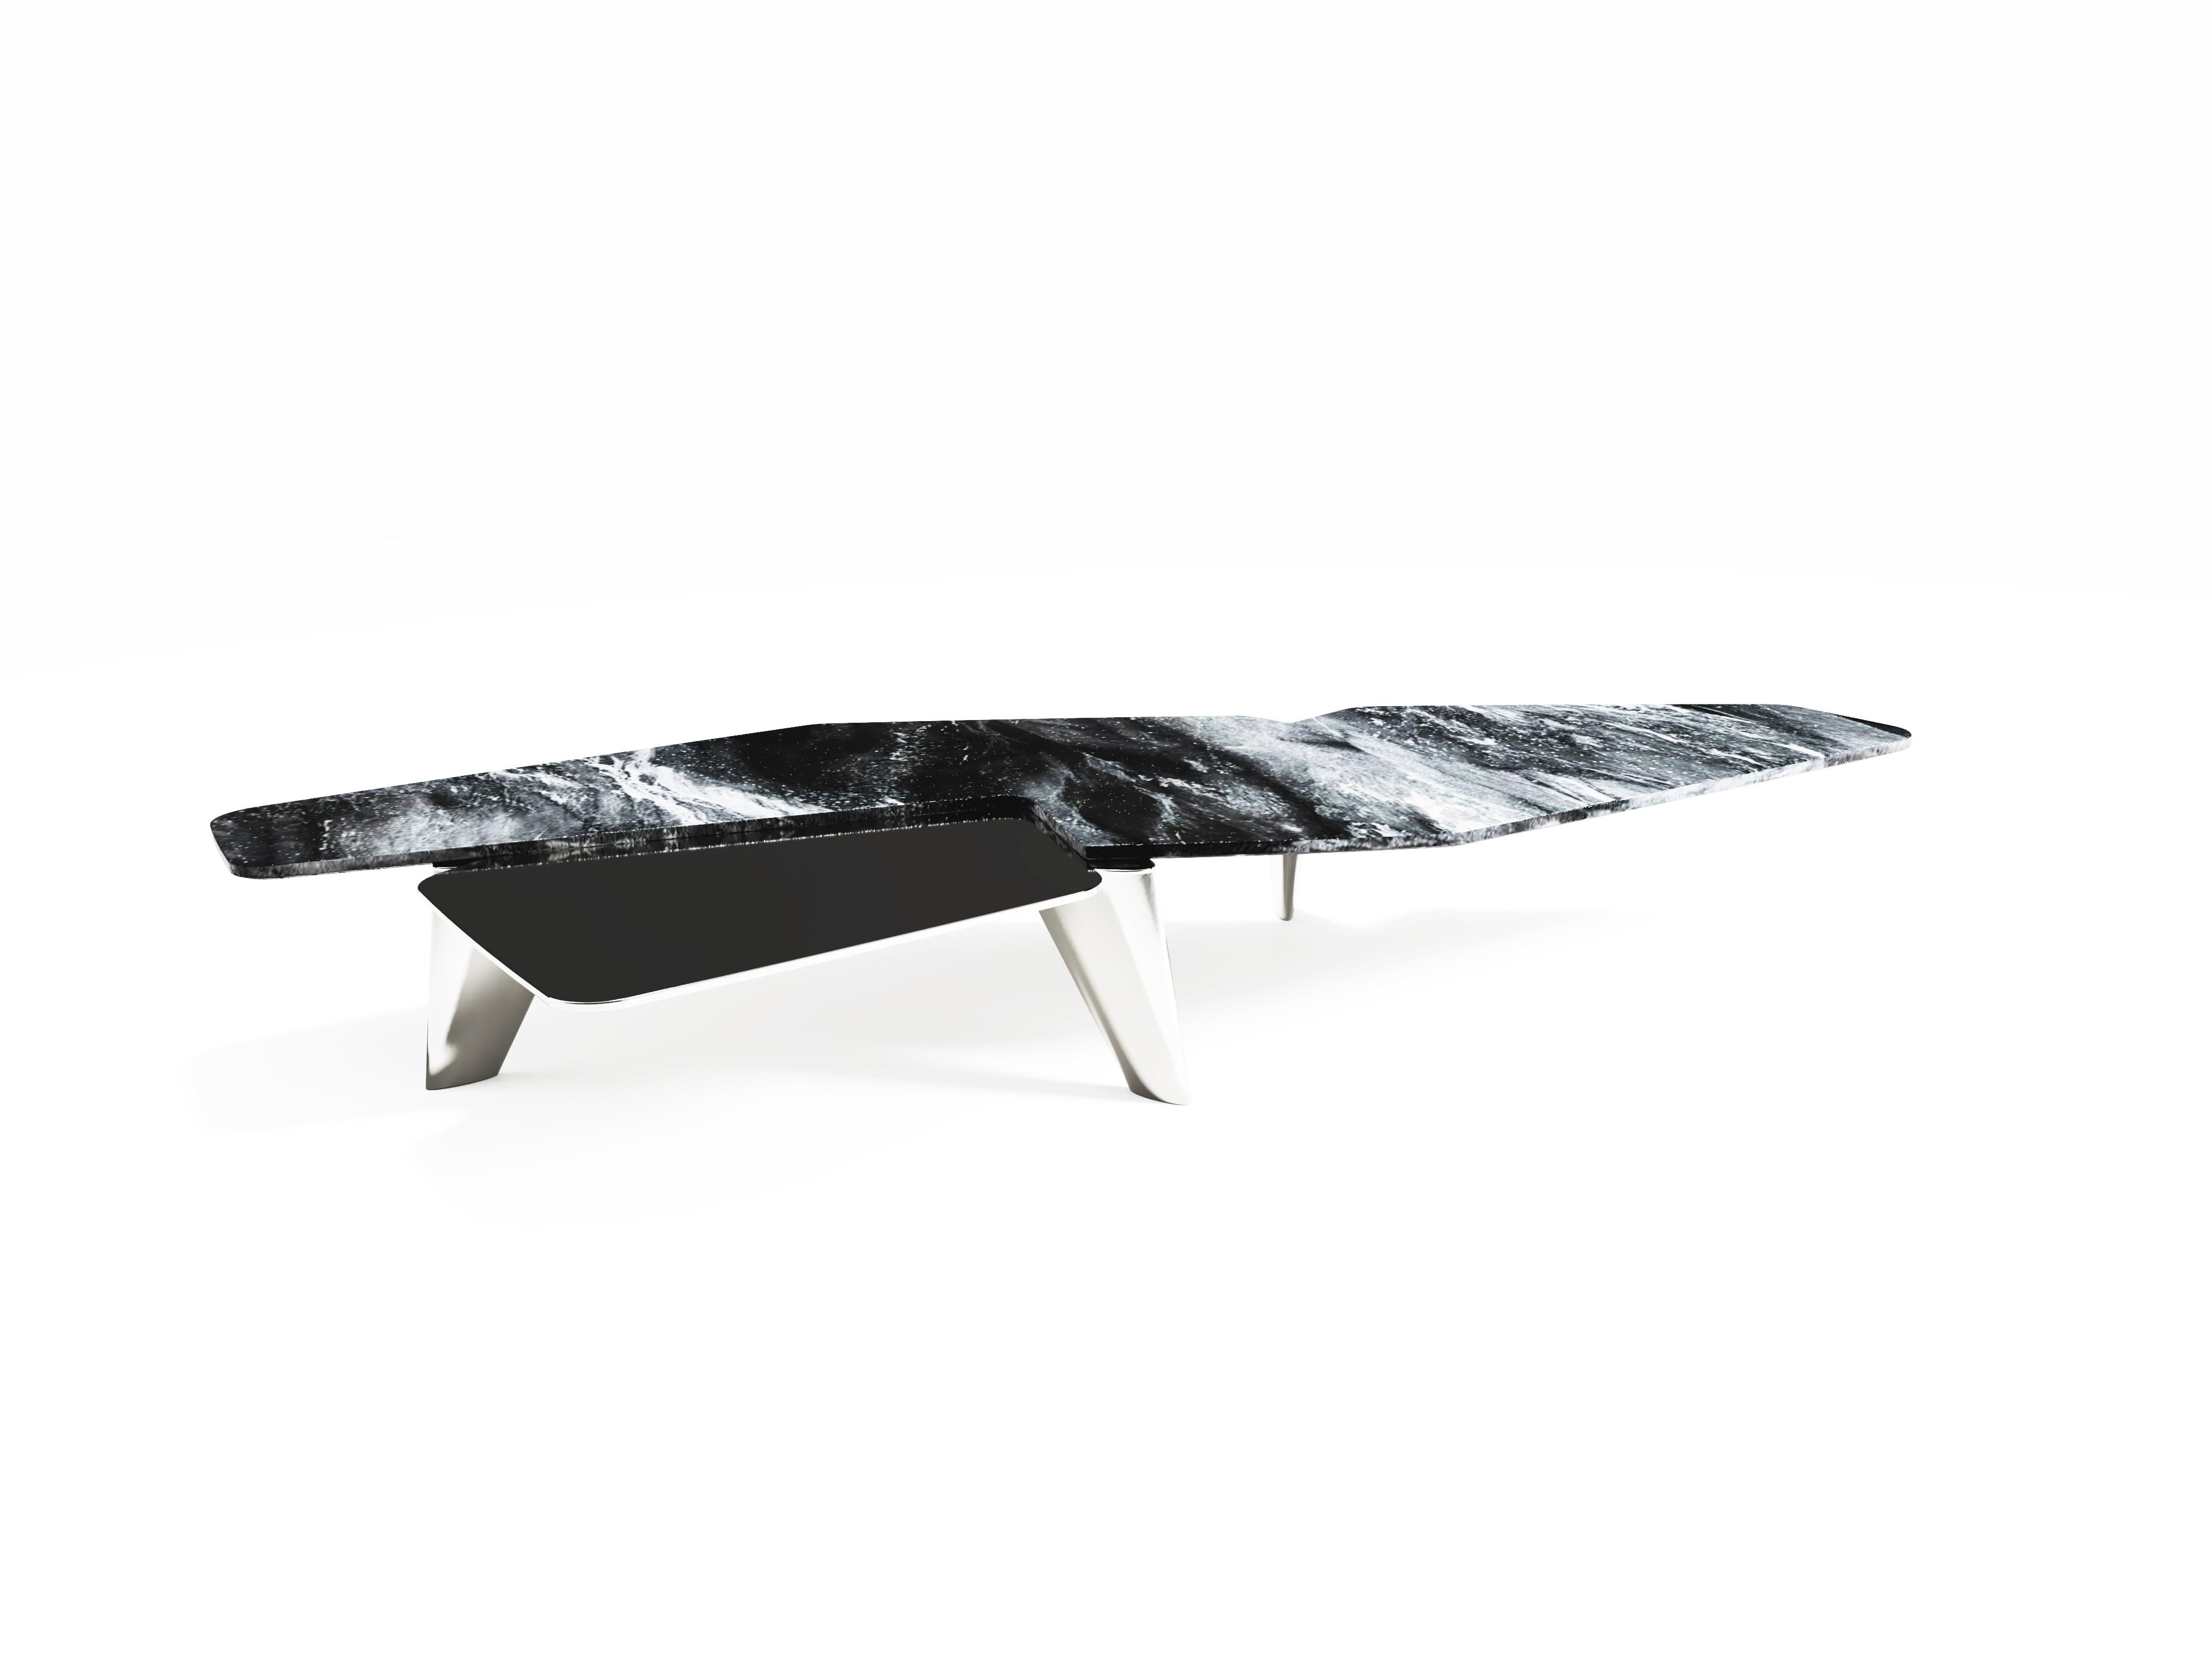 The Elements II coffee table by Grzegorz Majka
Edition 1 of 1
Dimensions: 87 x 59 x 13 in
Materials: marble, solid stainless steel plate in brushed finish

“The Elements II” - contemporary center coffee table featuring marble and solid